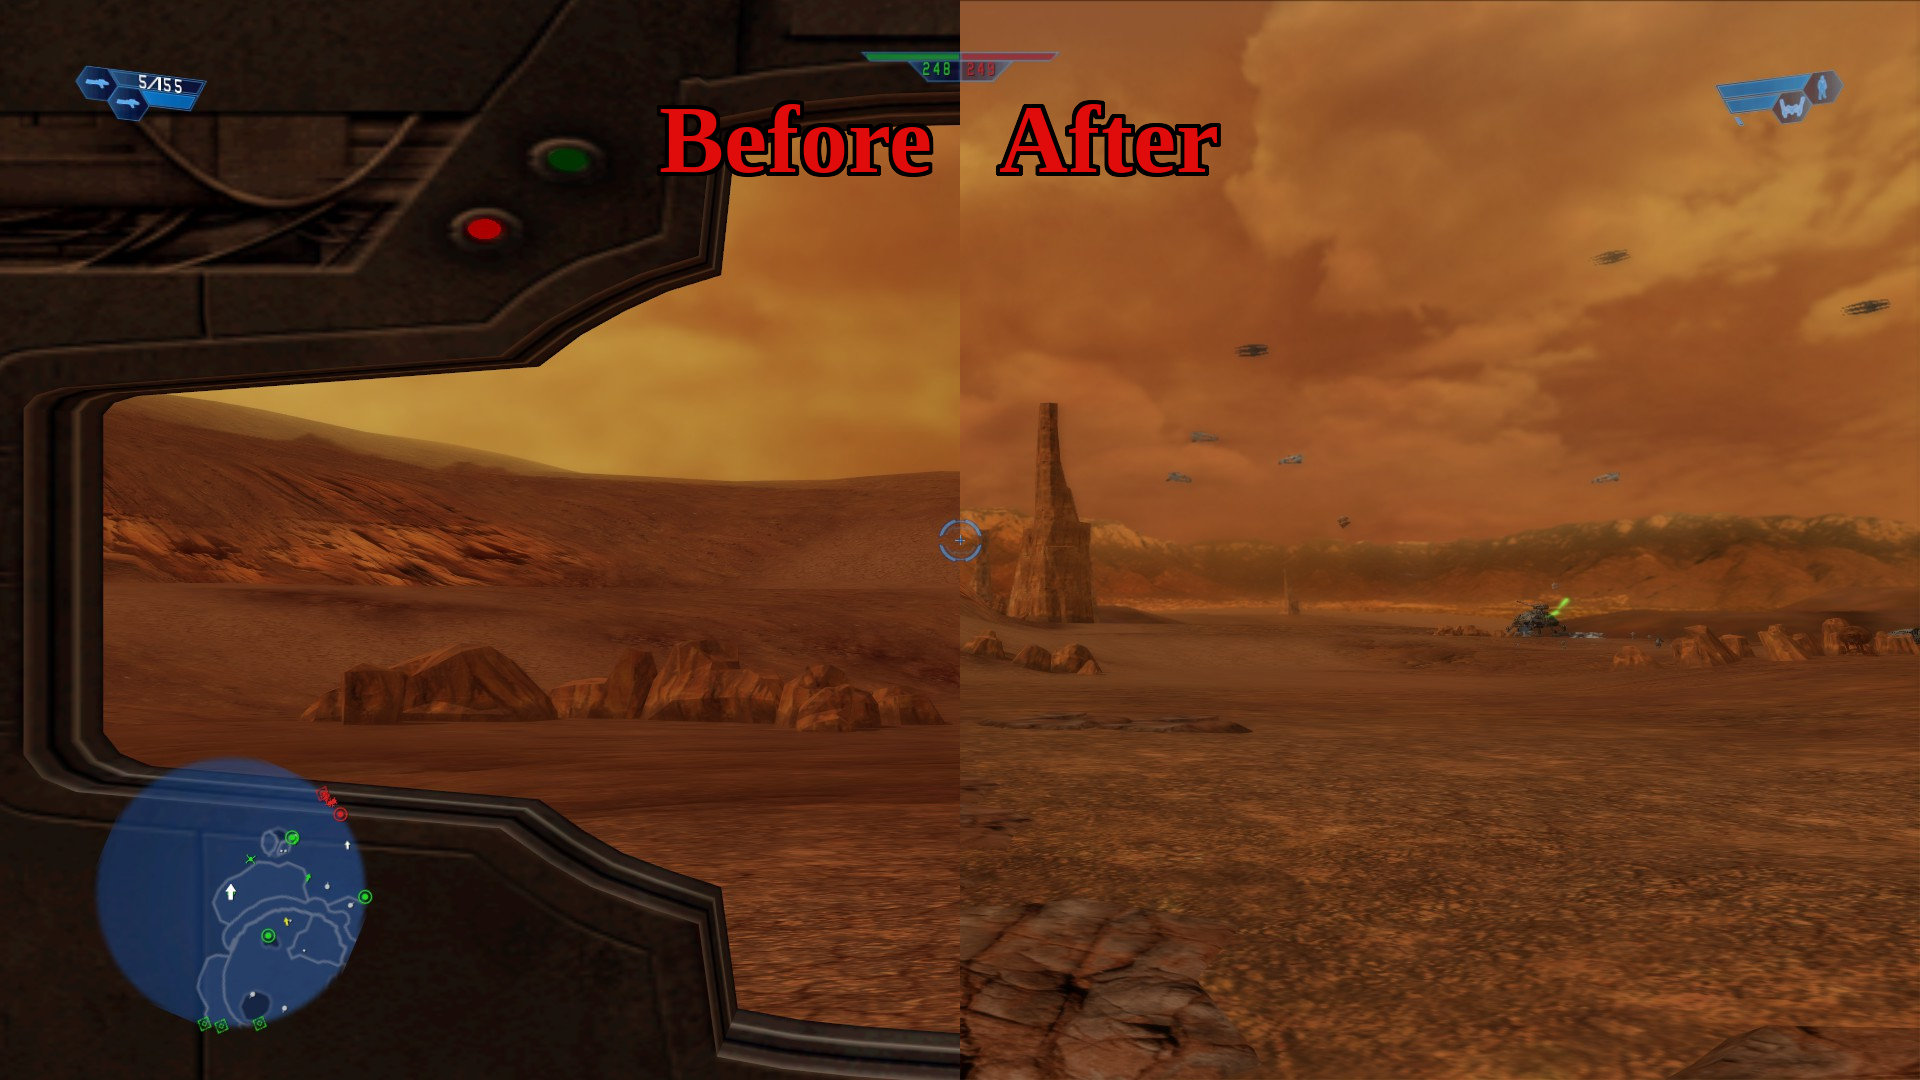 Star wars battlefront classic collection switch. Star Wars Battlefront (Classic, 2004). Battlefront 2004. Battlefront Classic. Battlefront 2004 Maps convertion.